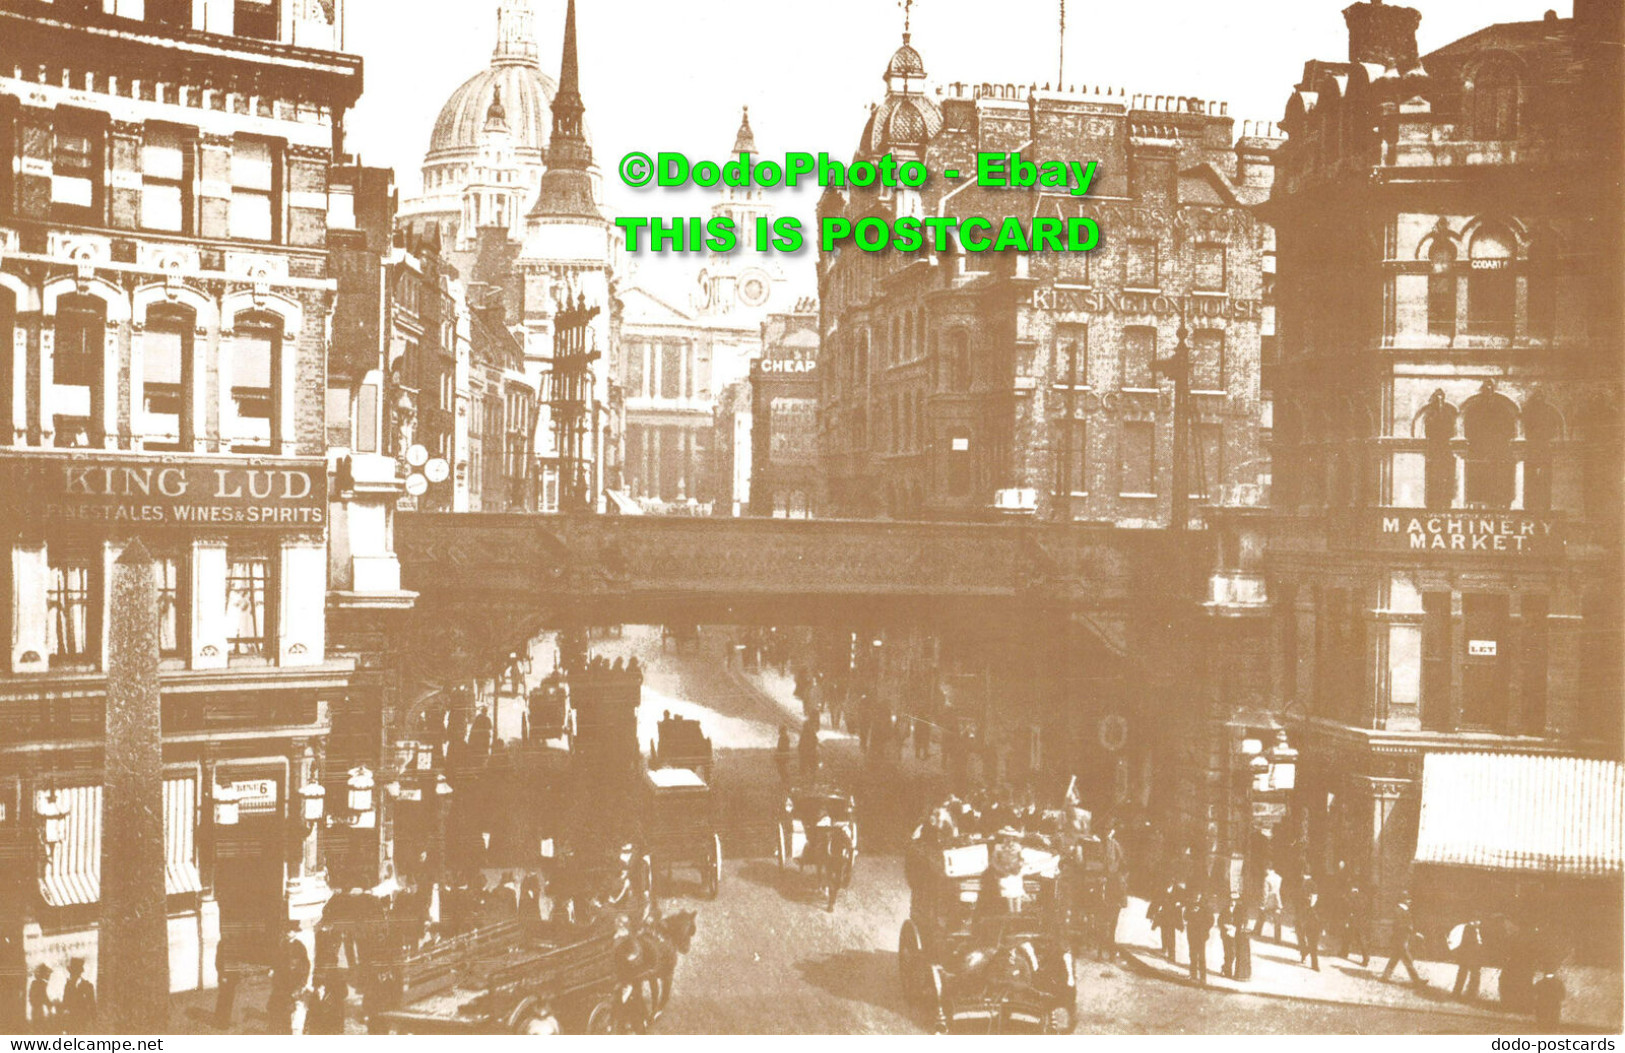 R354630 Ludgate Circus. Pastime Postcards - World